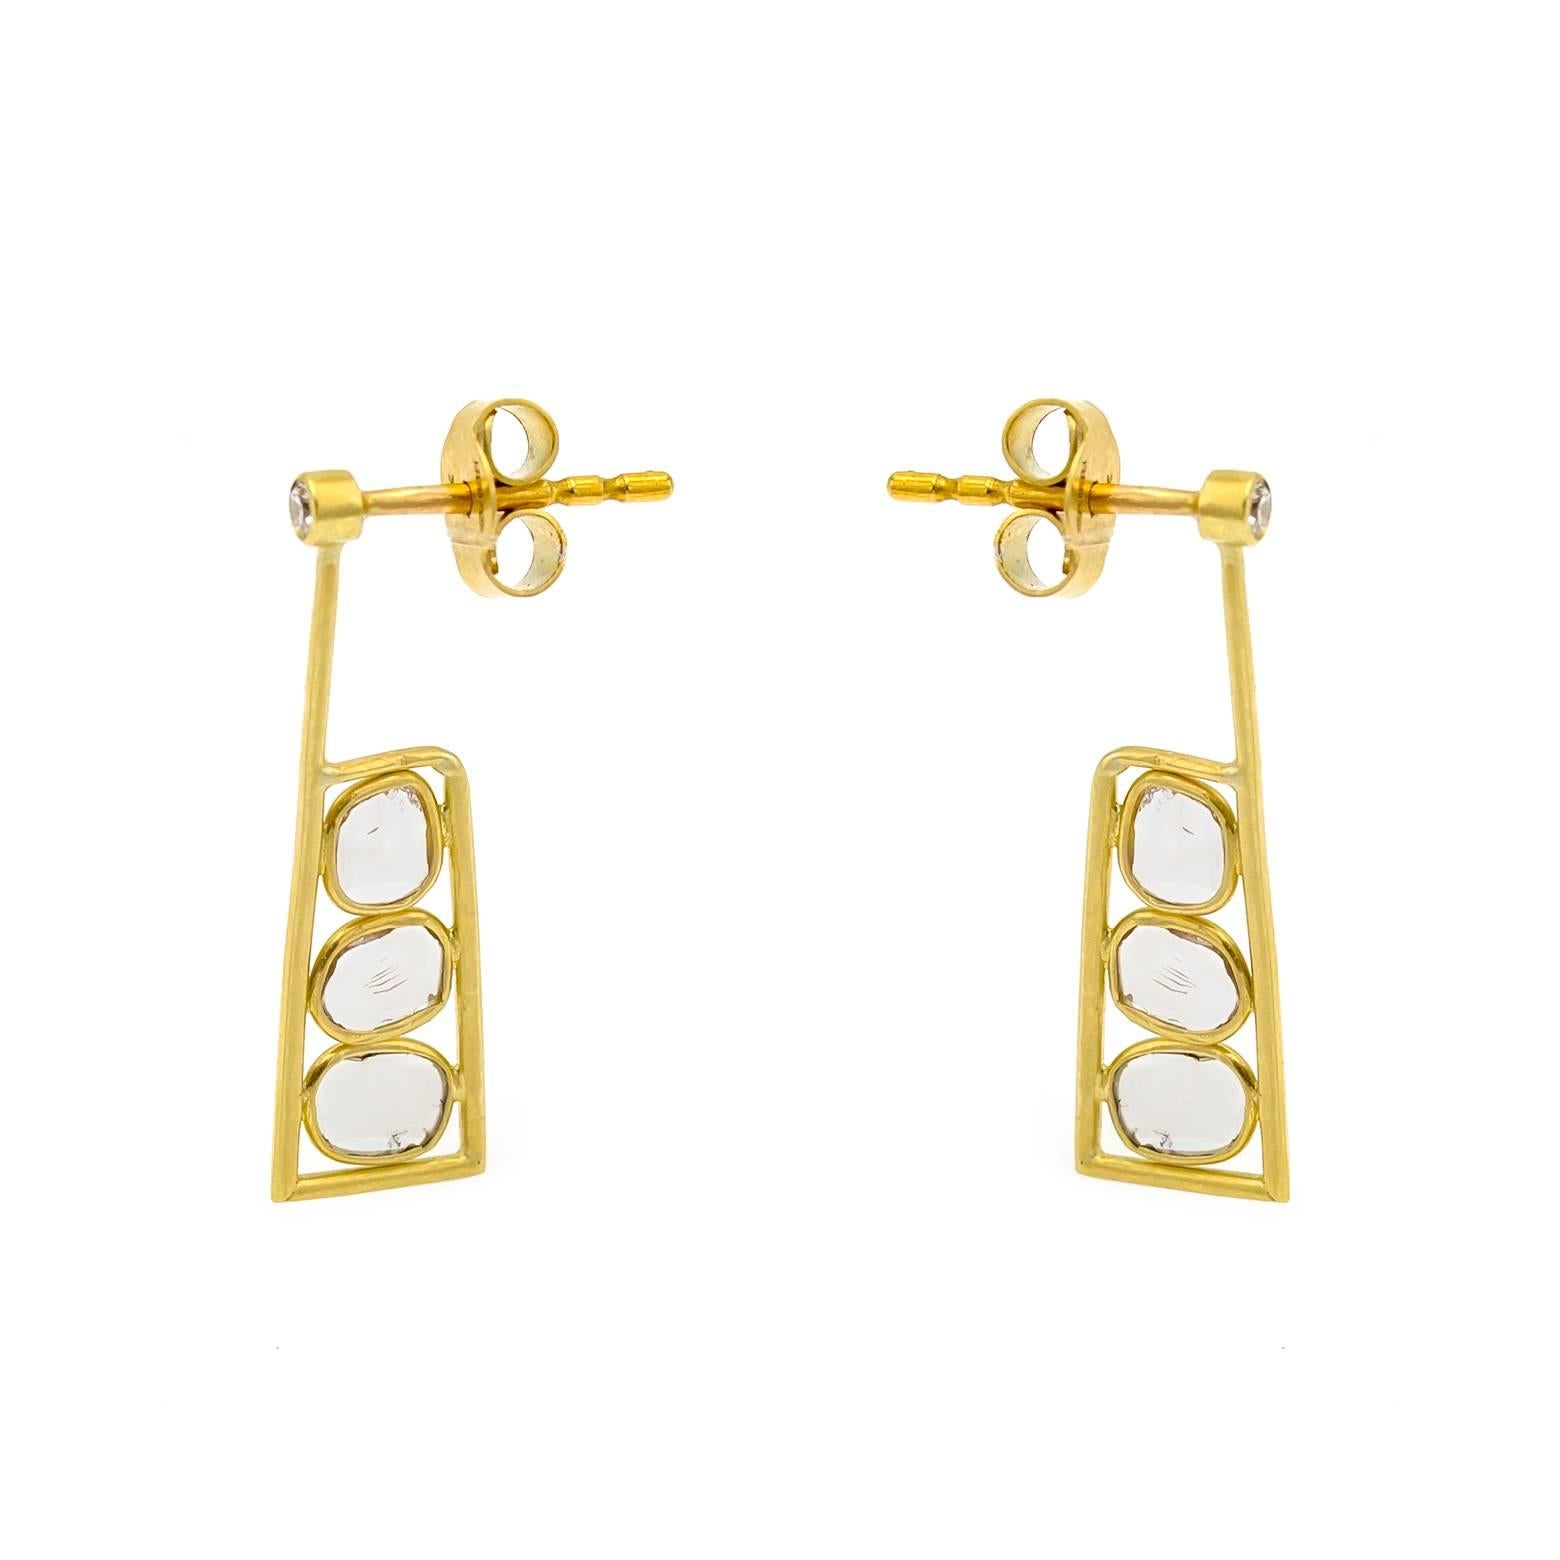 Satin Yellow Gold and Rose Cut Diamond Square Rectangle Post Earrings 1